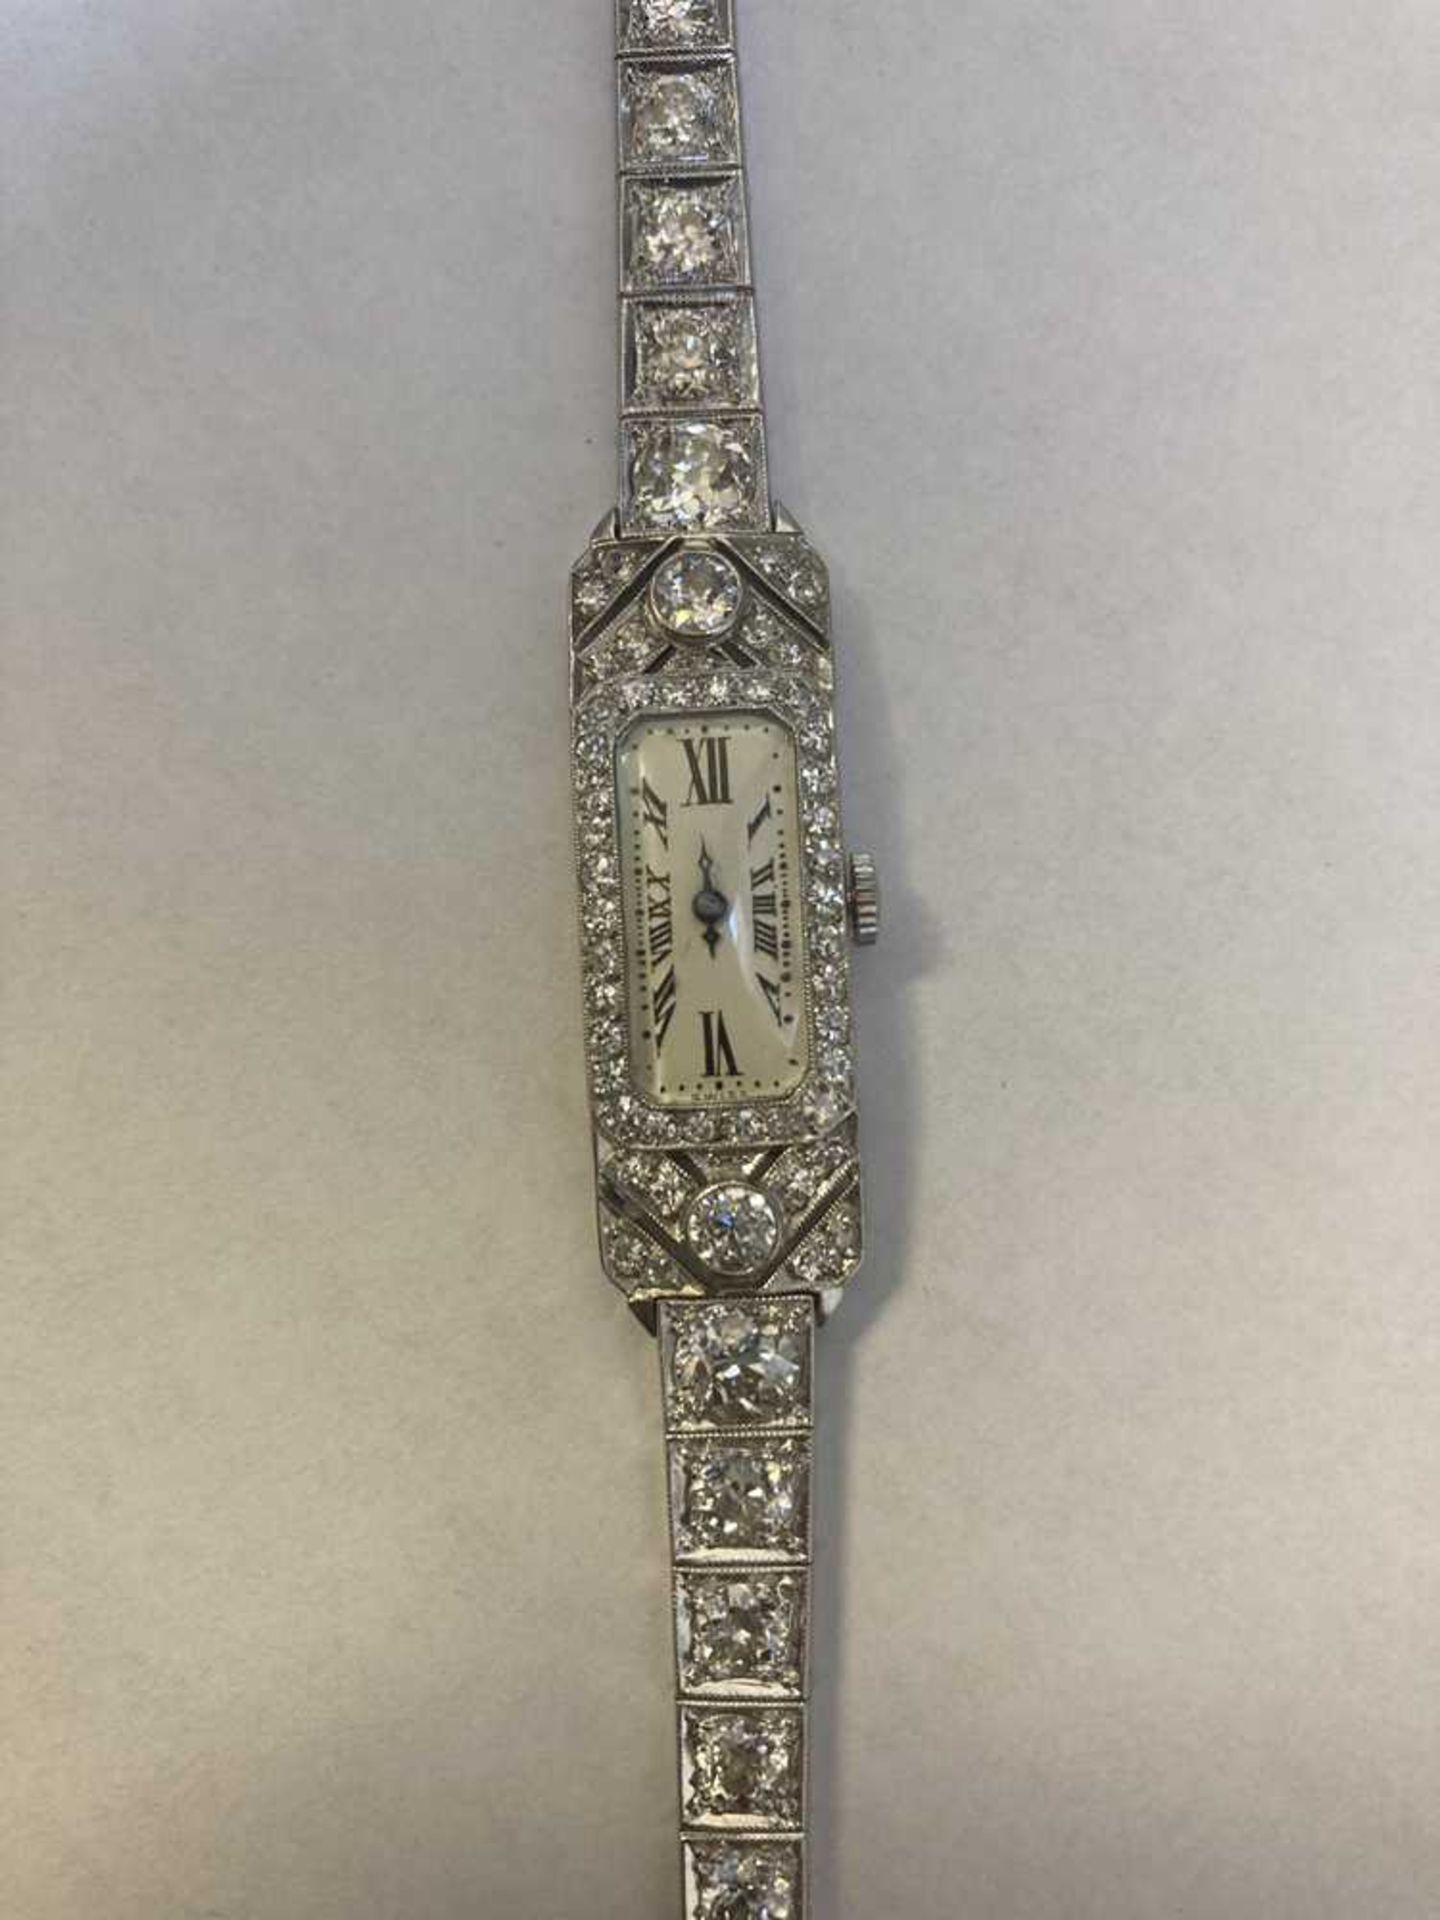 An early 20th century diamond cocktail watch, by Audemars Piguet - Image 7 of 7